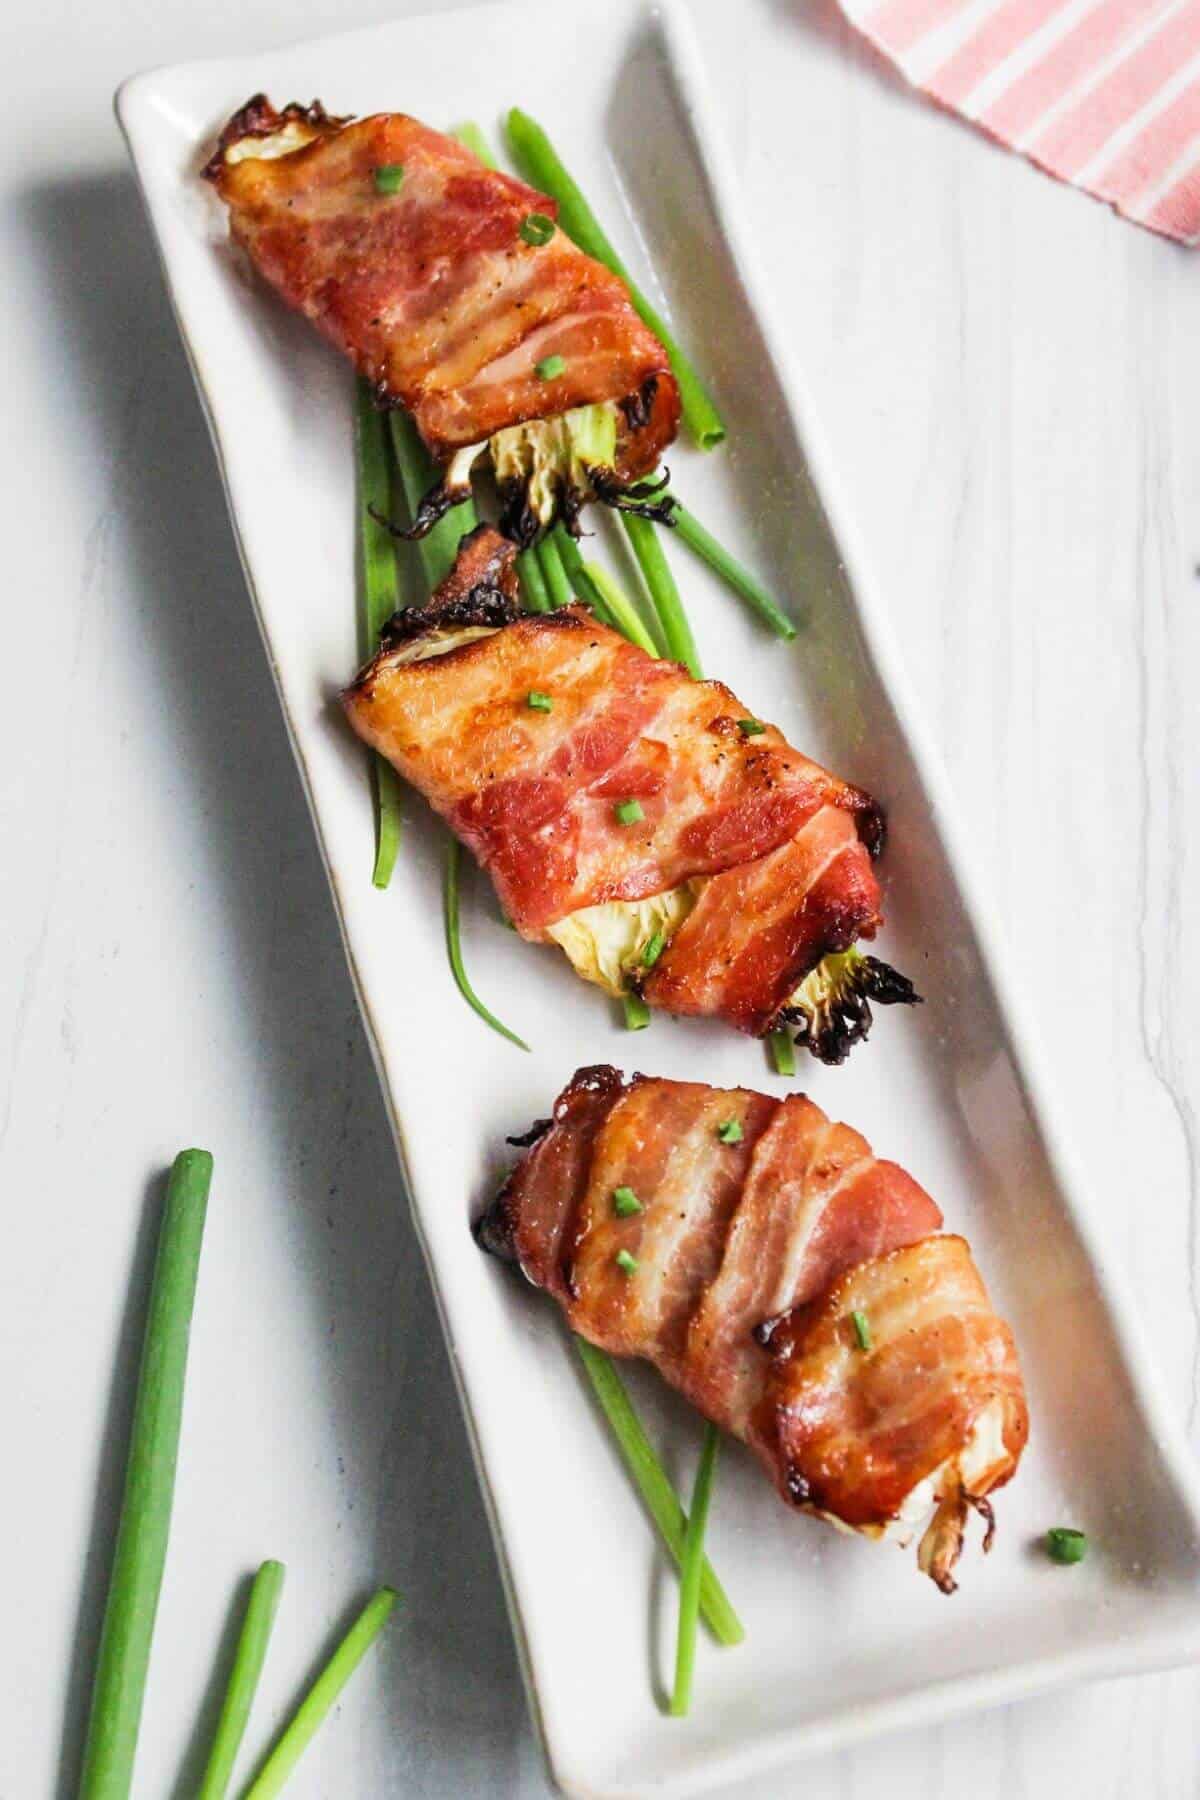 Bacon wrapped air fryer cabbage wedges on rectangular platter.